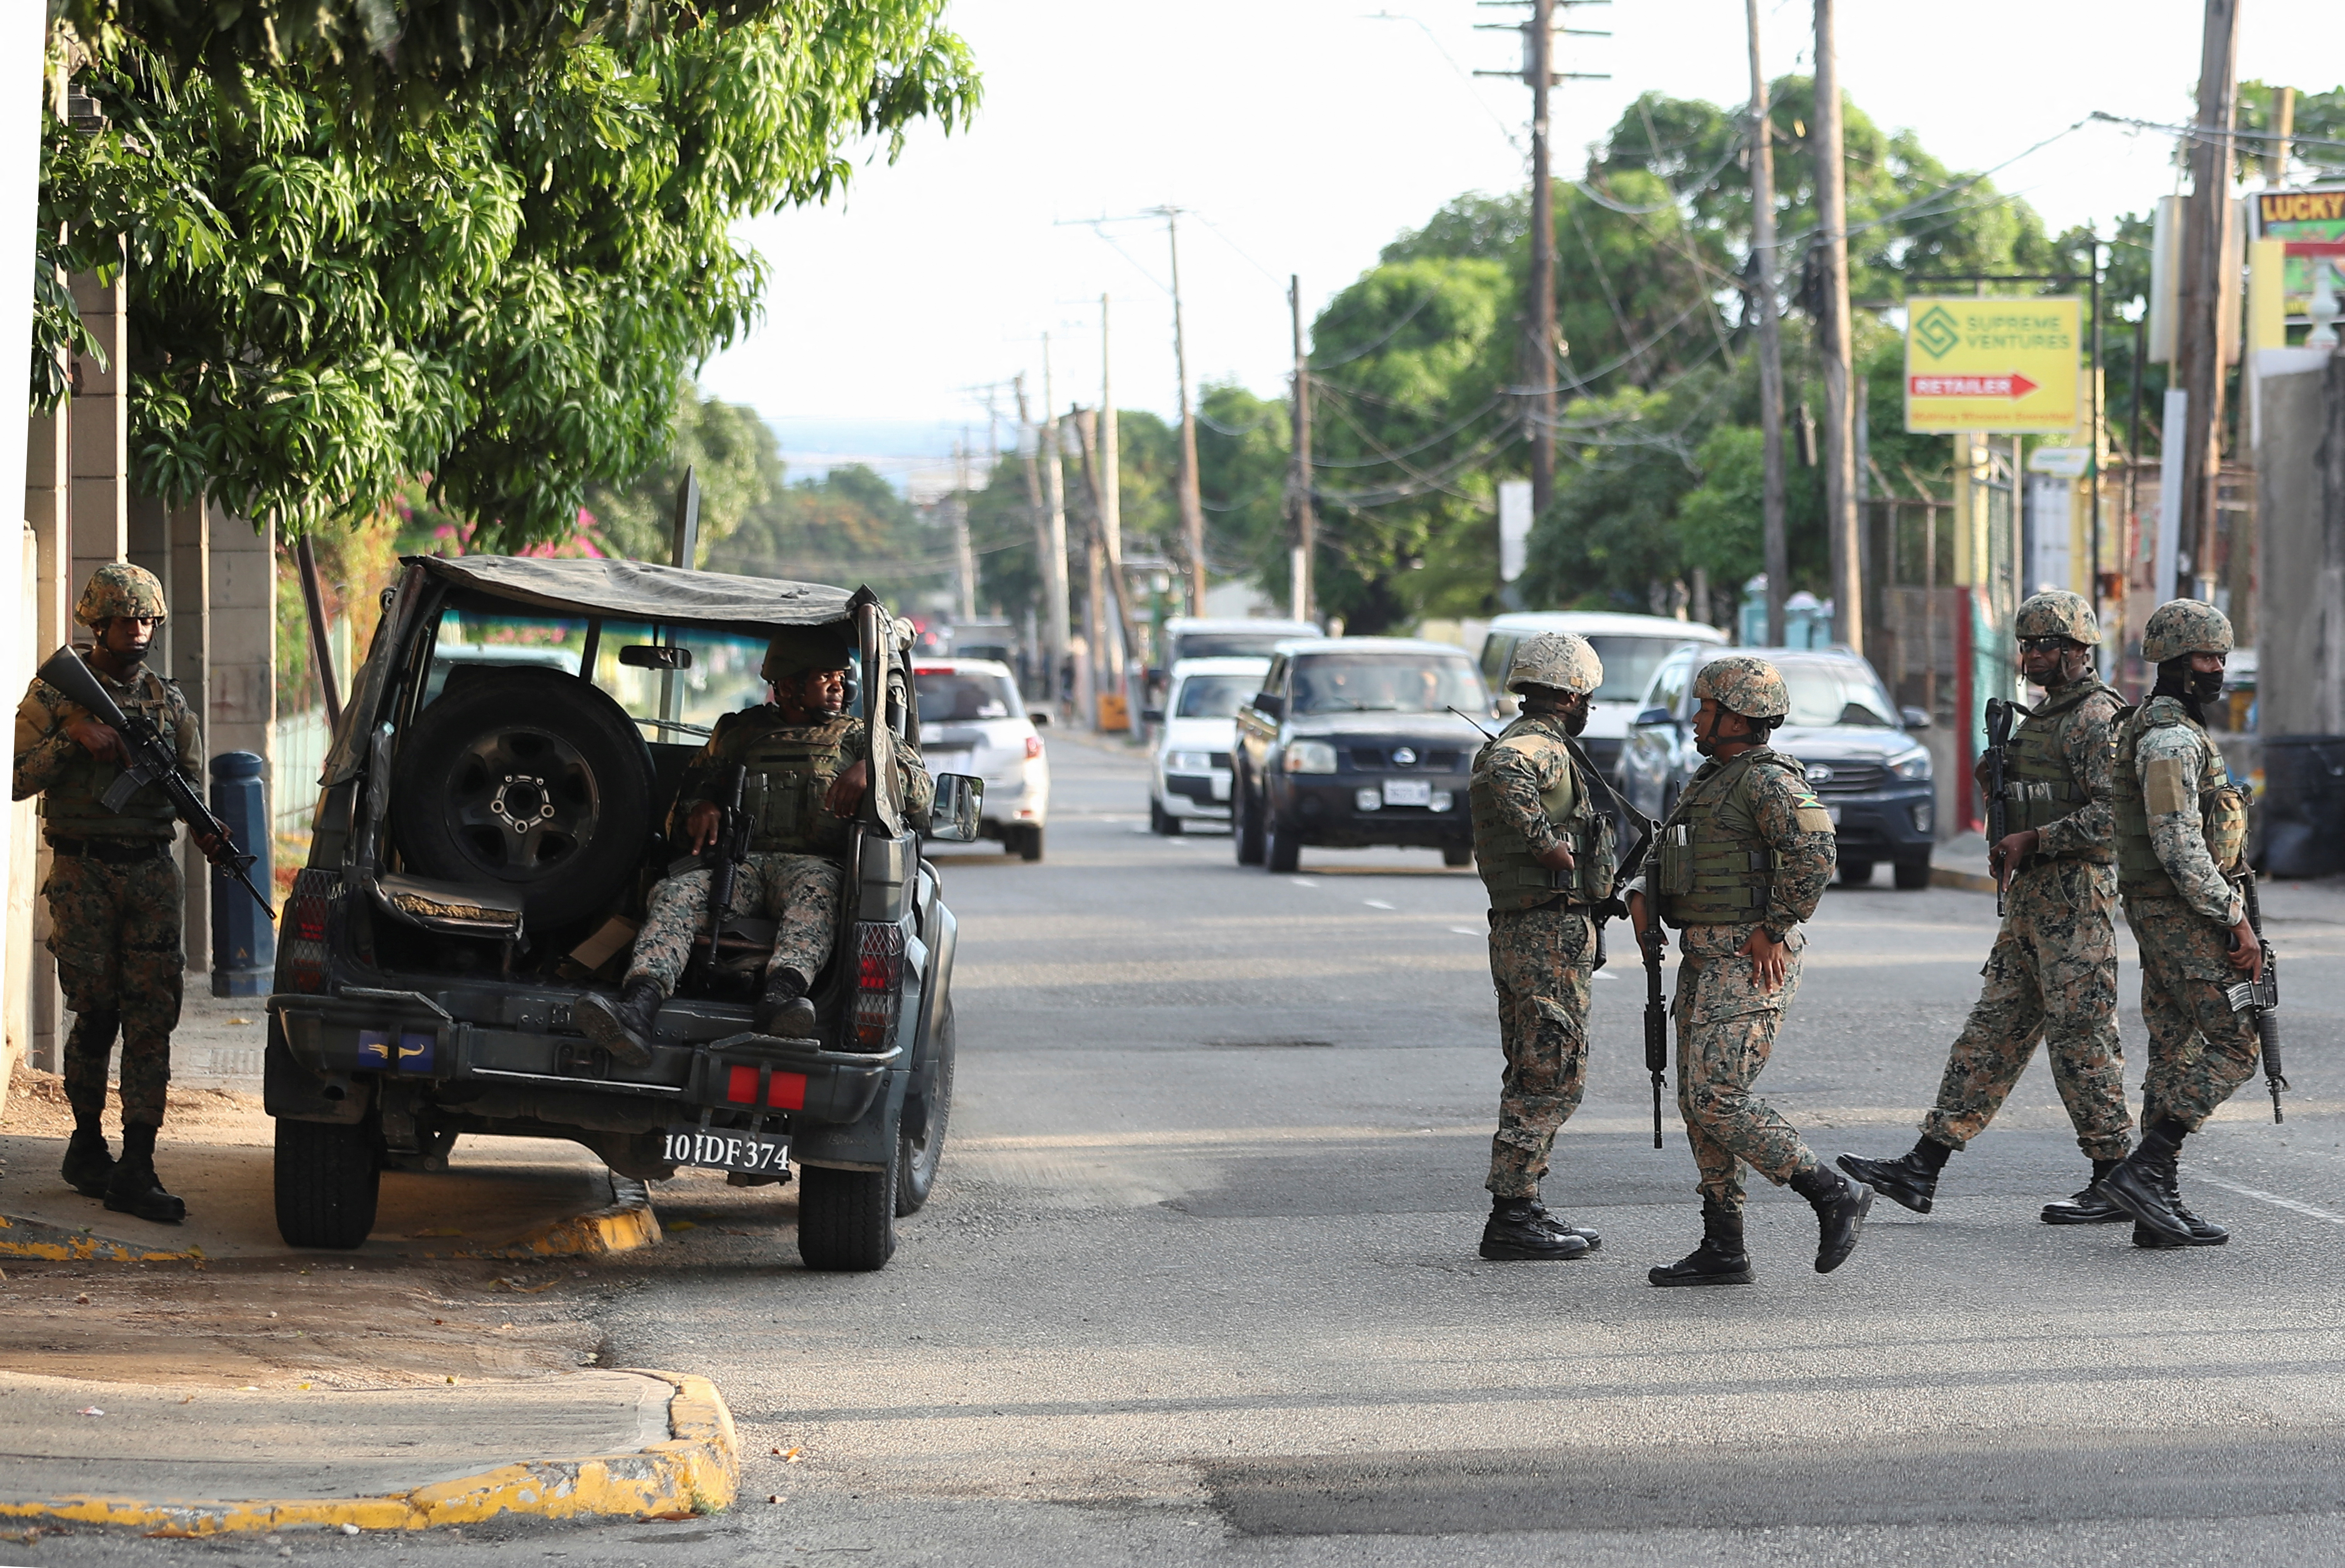 Jamaica declares regional states of emergency due to gang violence